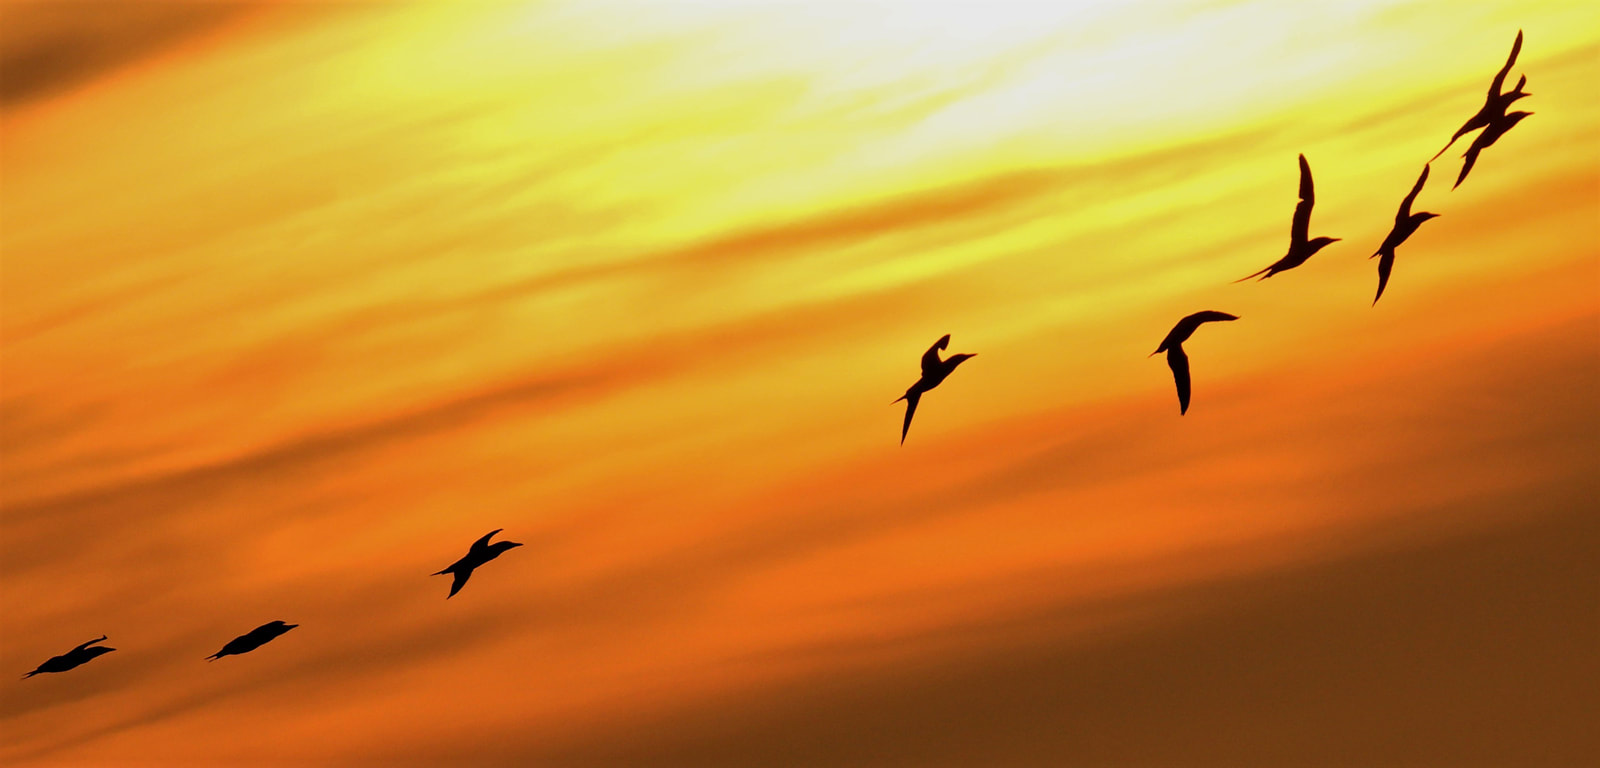 Good composition with silhouetted birds on the diagonal.  Rich warm colours.